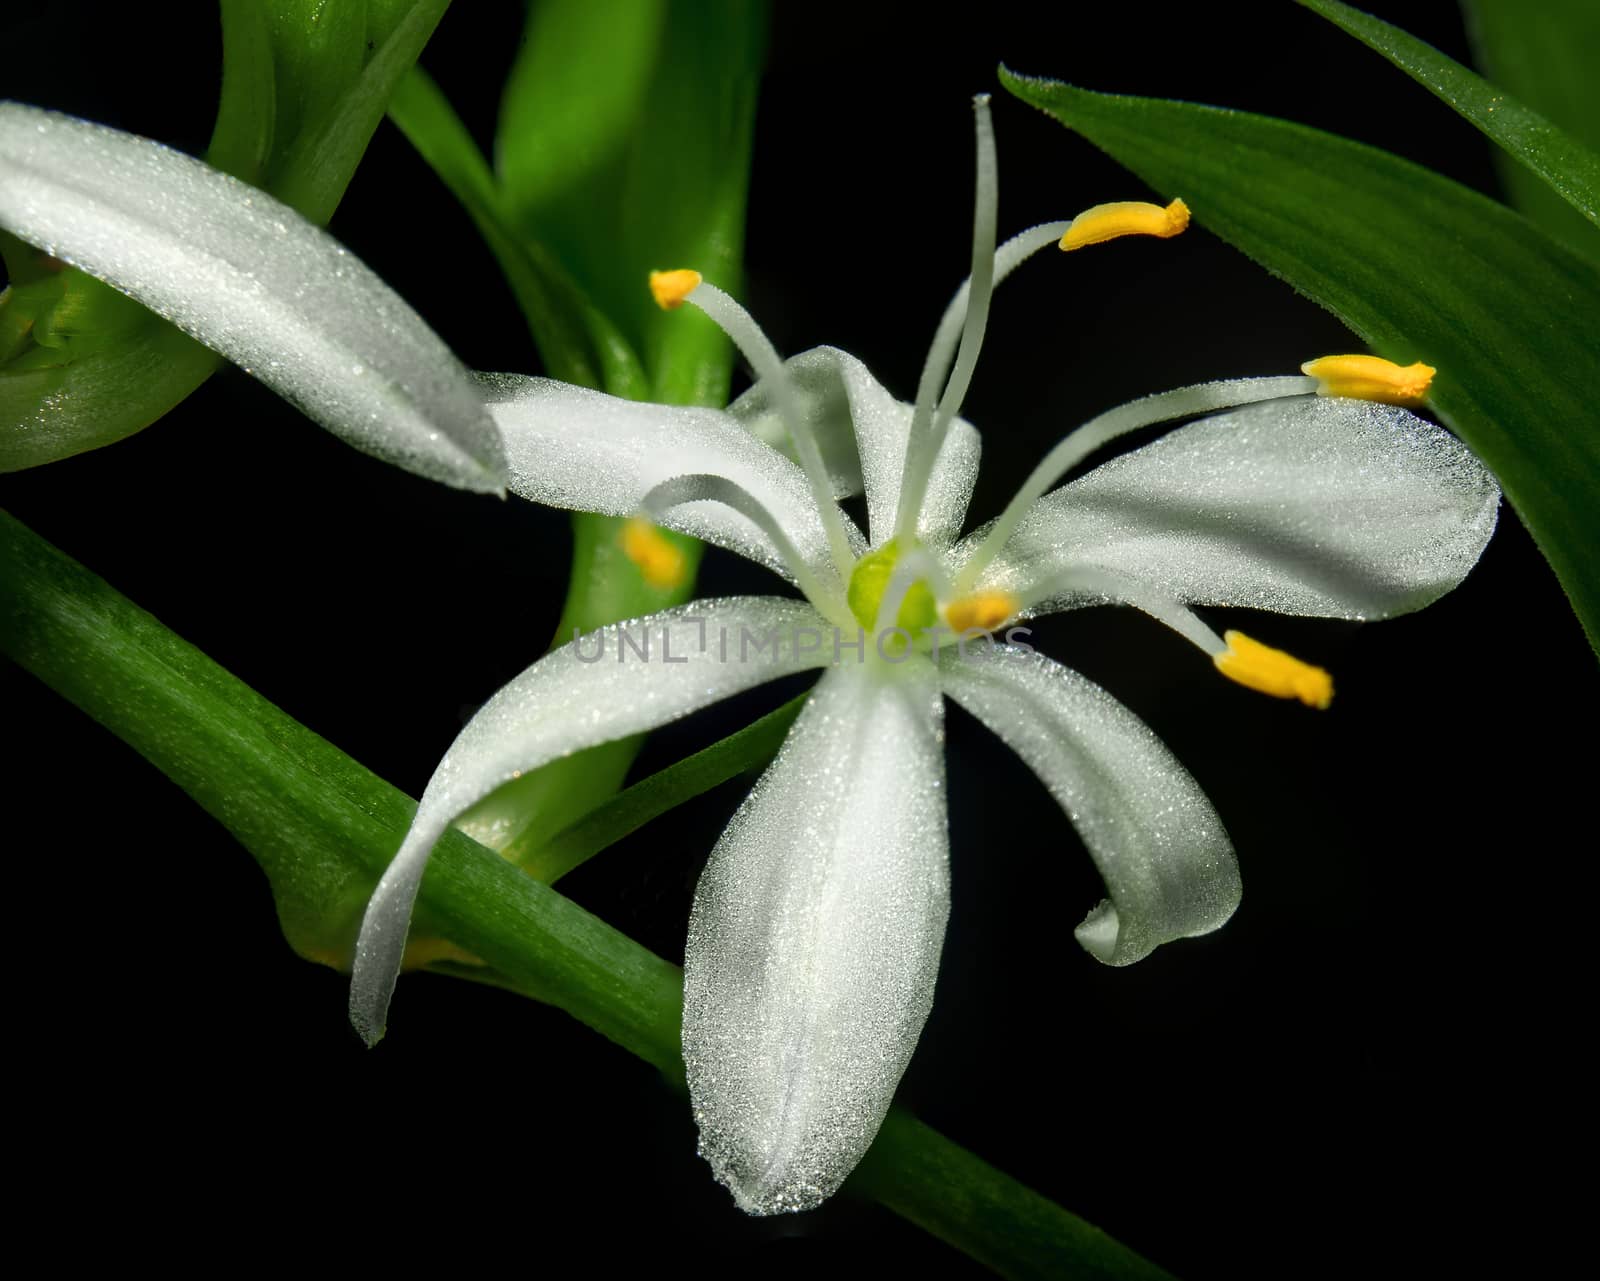 A white chlorophytum comosum flower in a branched inflorescence. Each flower has six three-veined tepals. All on black background